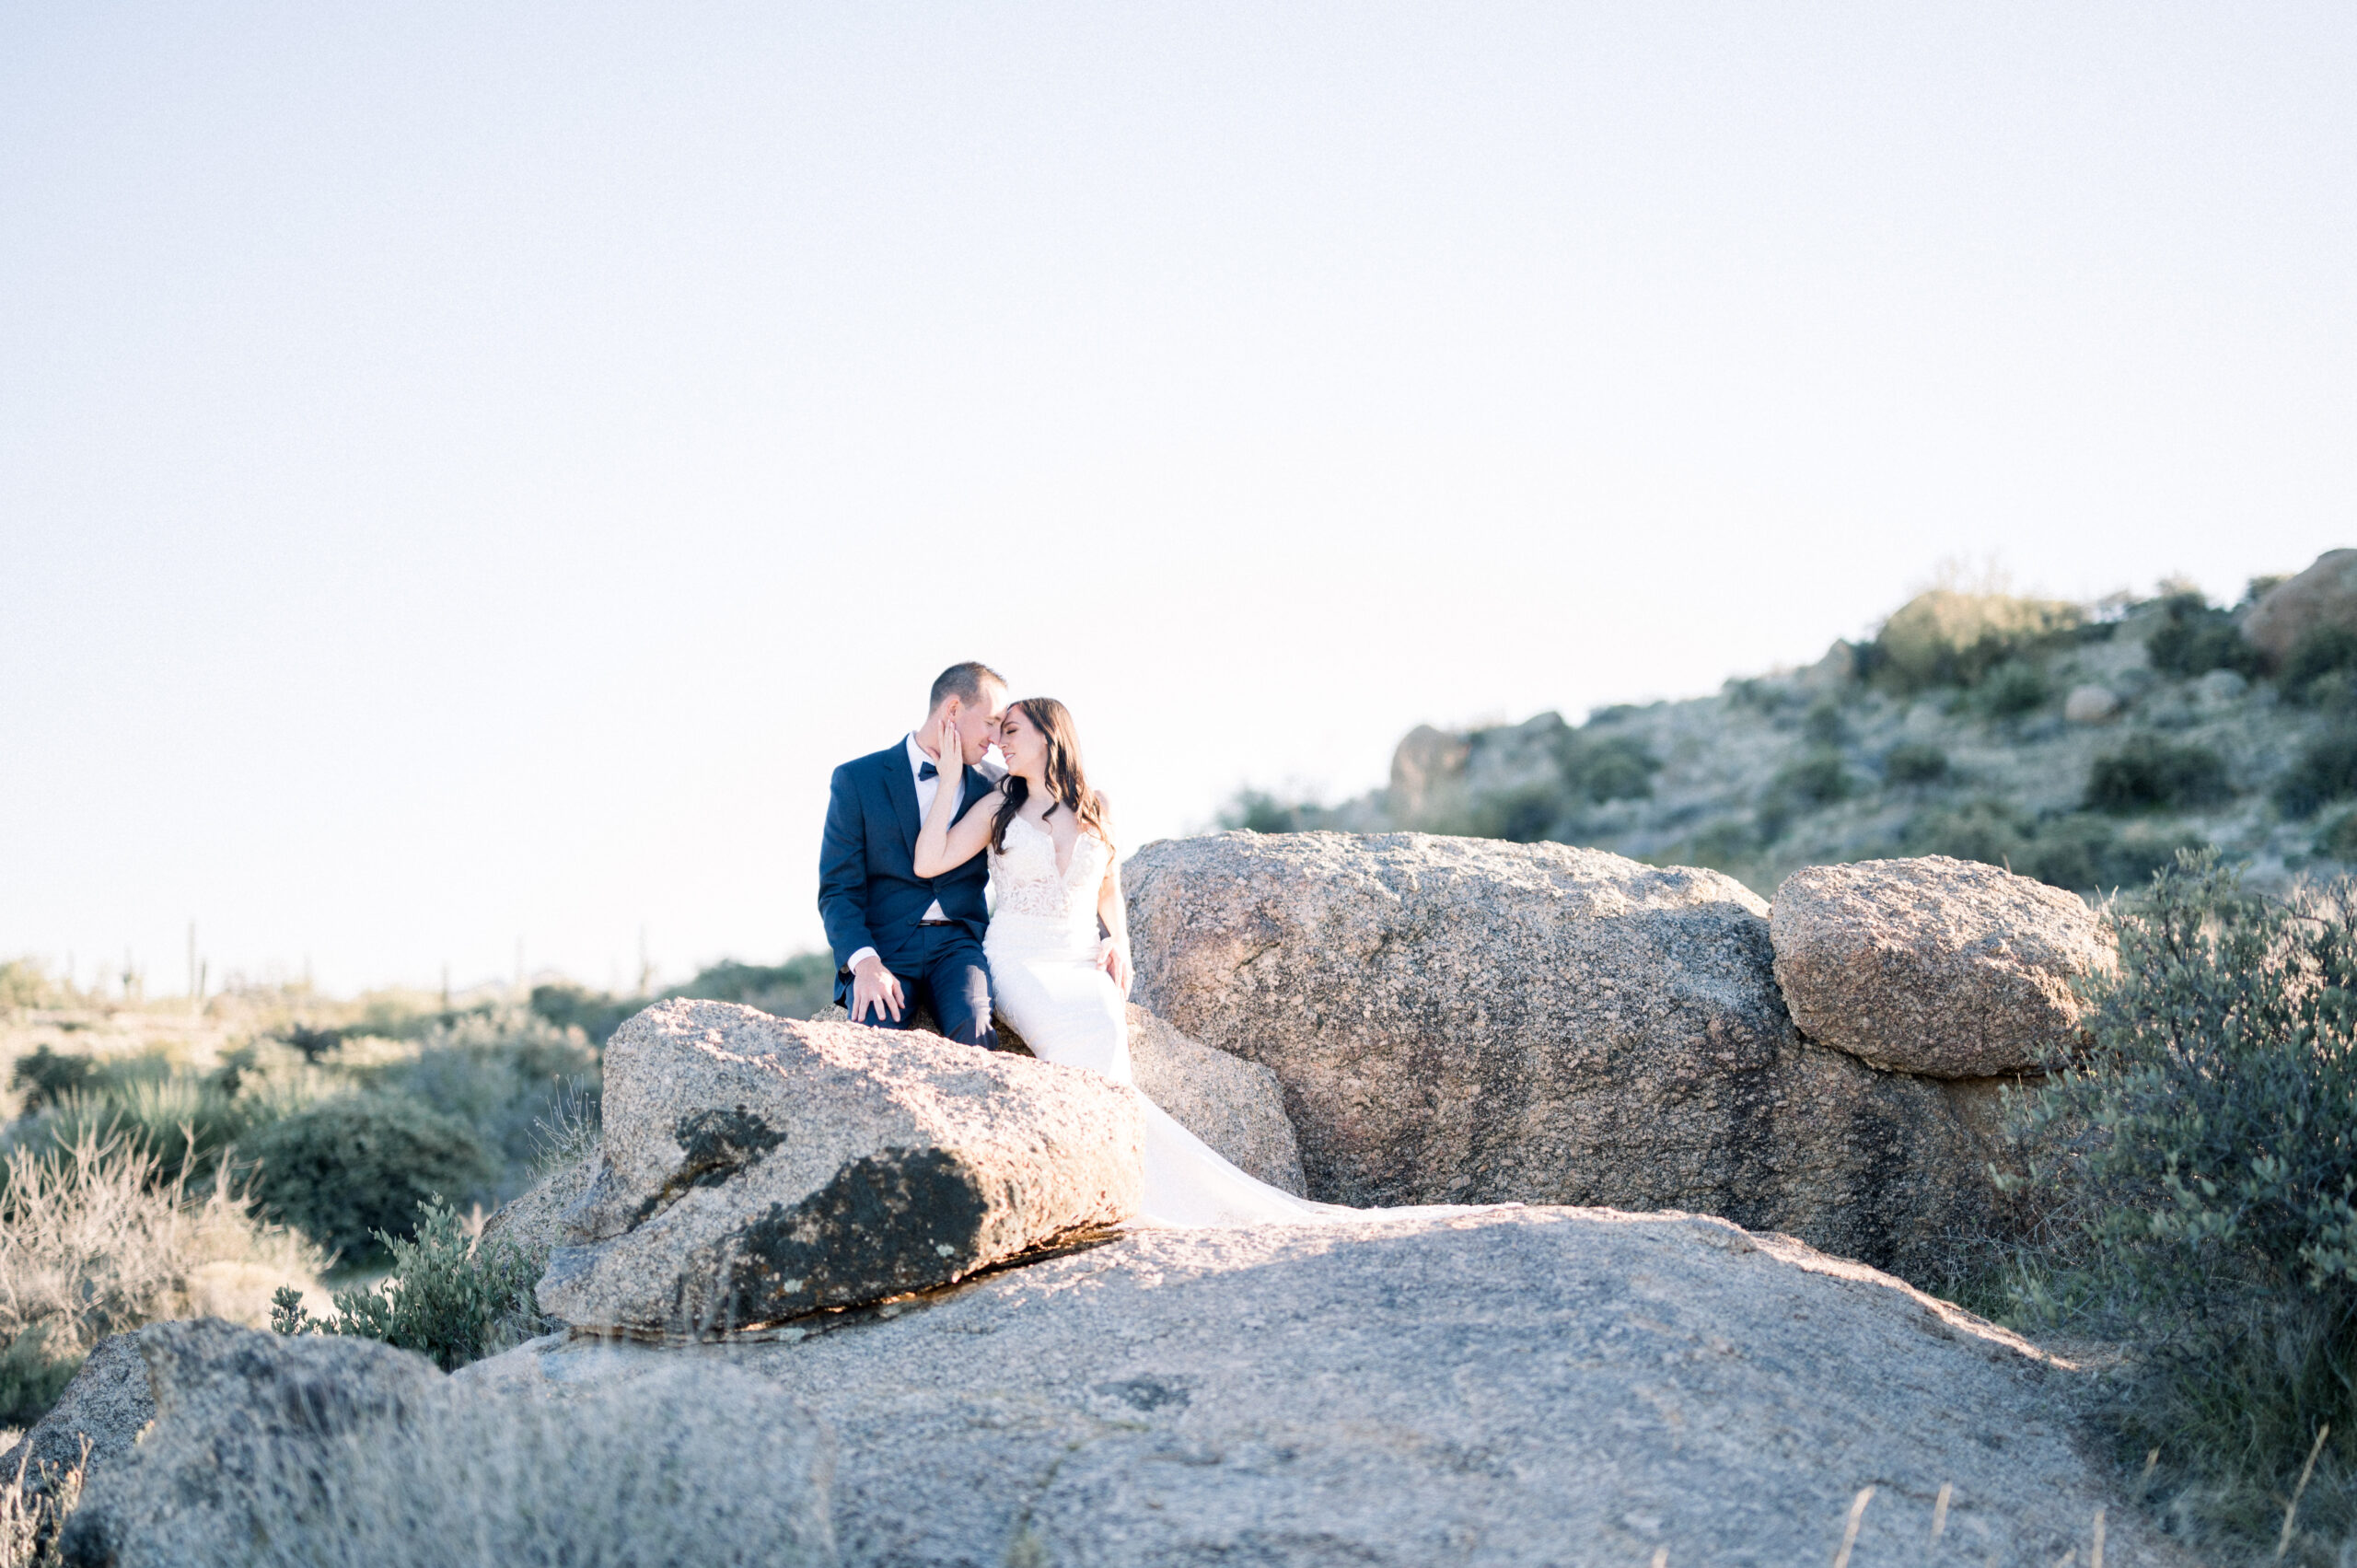 Debora and Dustin were already married but they wanted to wear their wedding attire again and have a stunning Scottsdale Desert Boulder Wedding shoot.